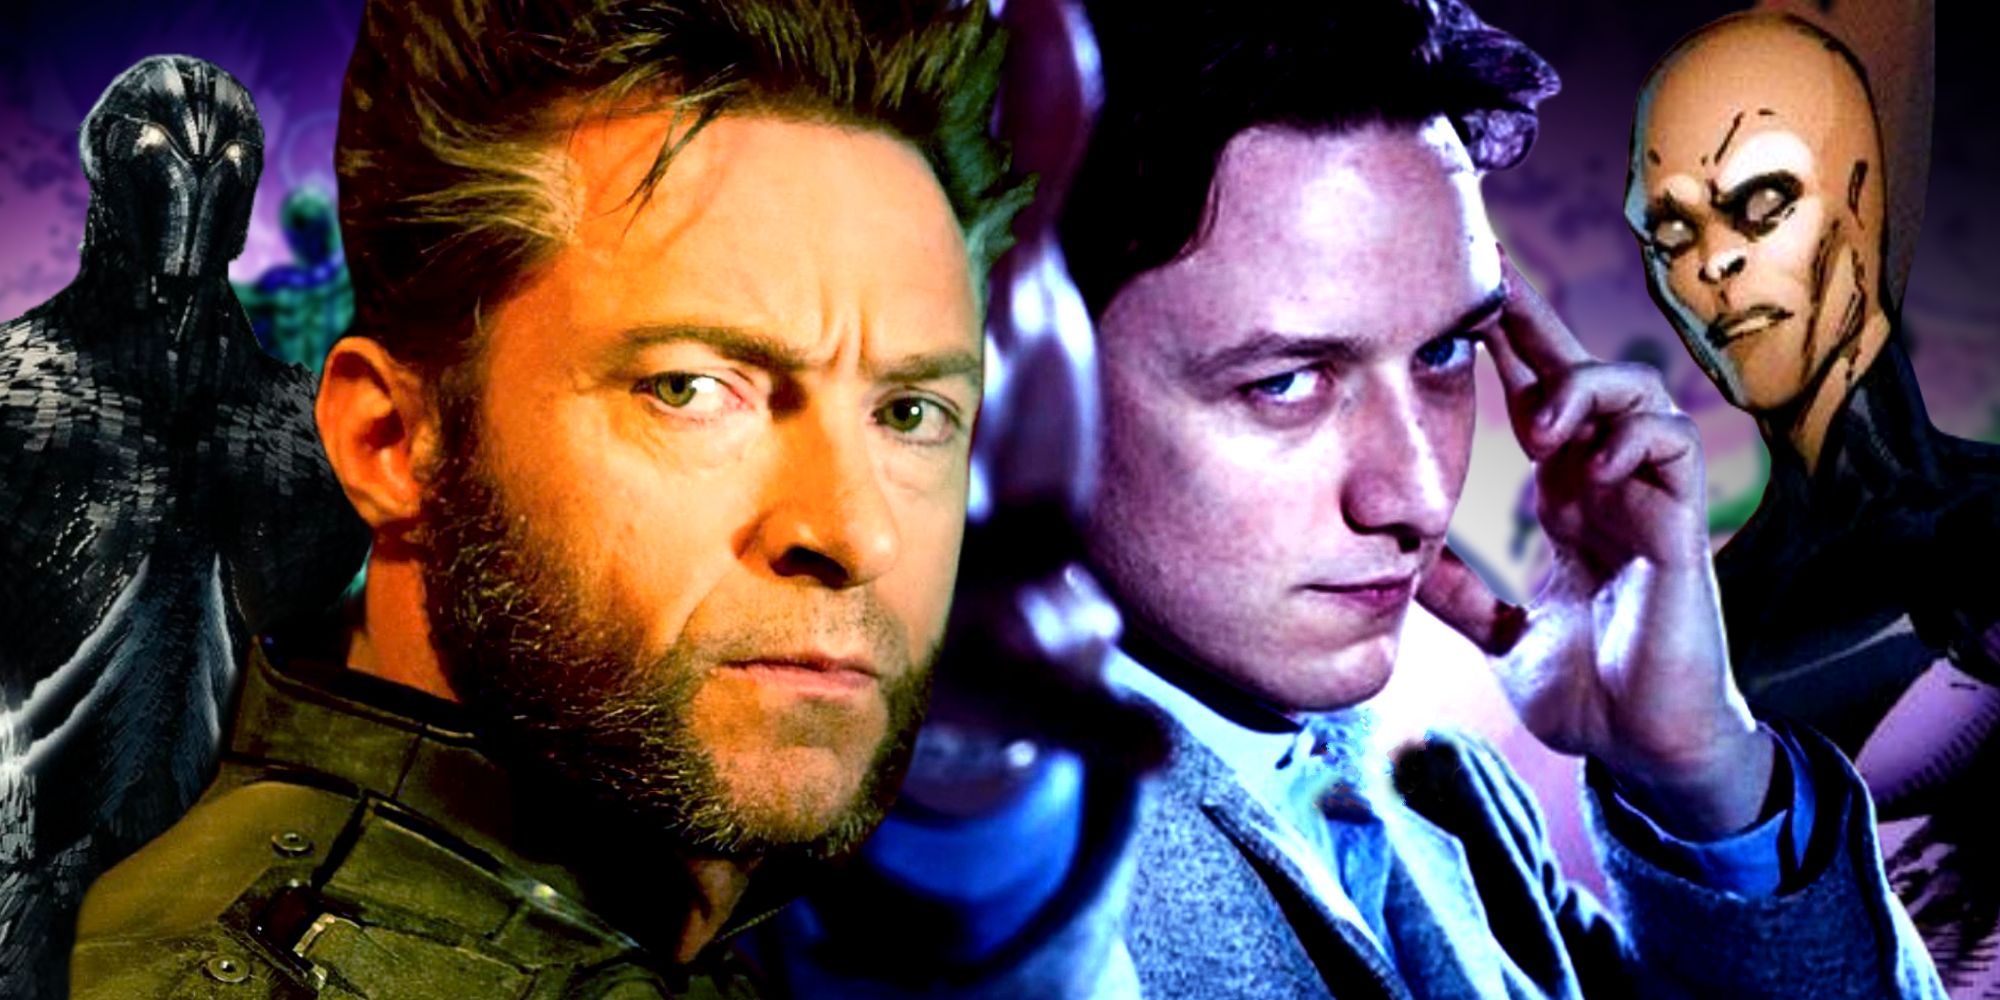 Wolverine and Charles Xavier Face the Camera in X-Men First Class and Days of Future Past with Darwin and the Sentinels in the background